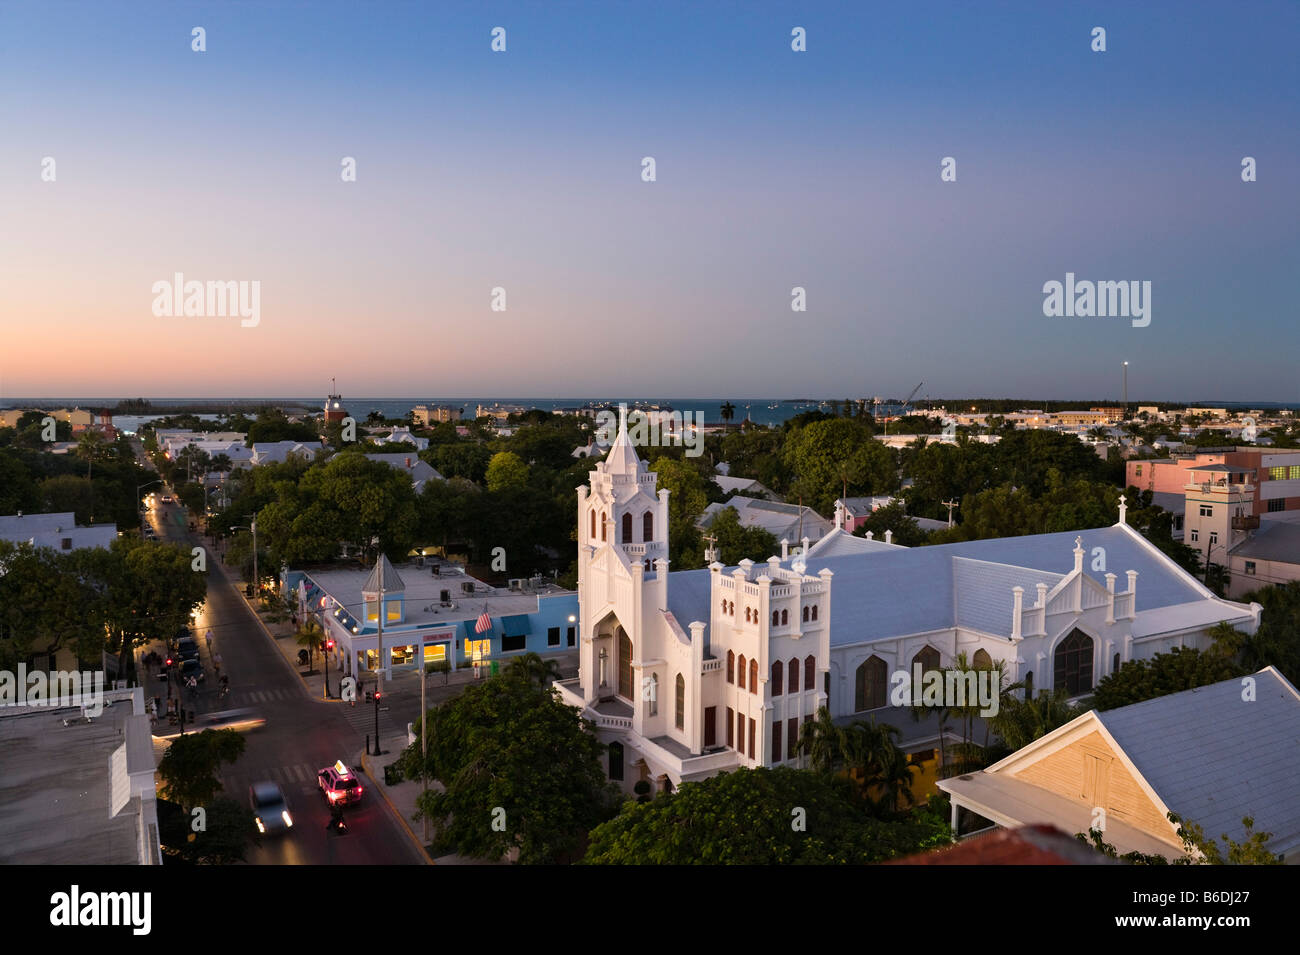 View down Duval Street at sunset from the roof of the Crowne Plaza La Concha Hotel, Key West, Florida Keys, USA Stock Photo